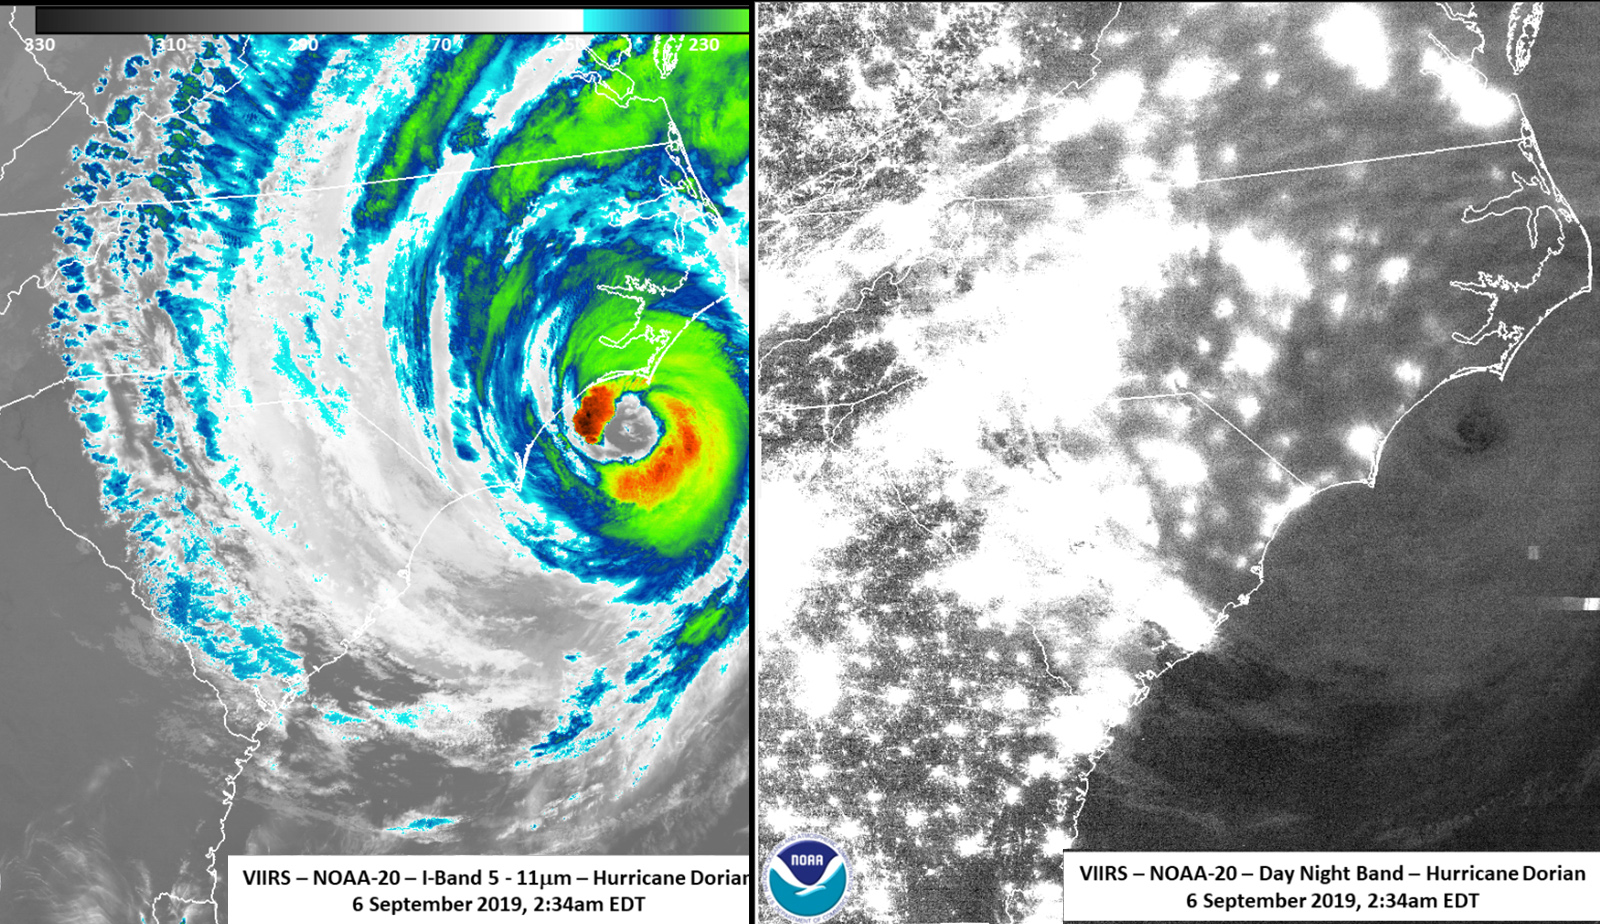 On the left, an infrared image shows the convection and circulation of Hurricane Dorian in red, yellow, green and blue. On the right, a grayscale image shows the clouds of Hurricane Dorian at night with parts of the eastern coast of the U.S. illuminated by nighttime lights.